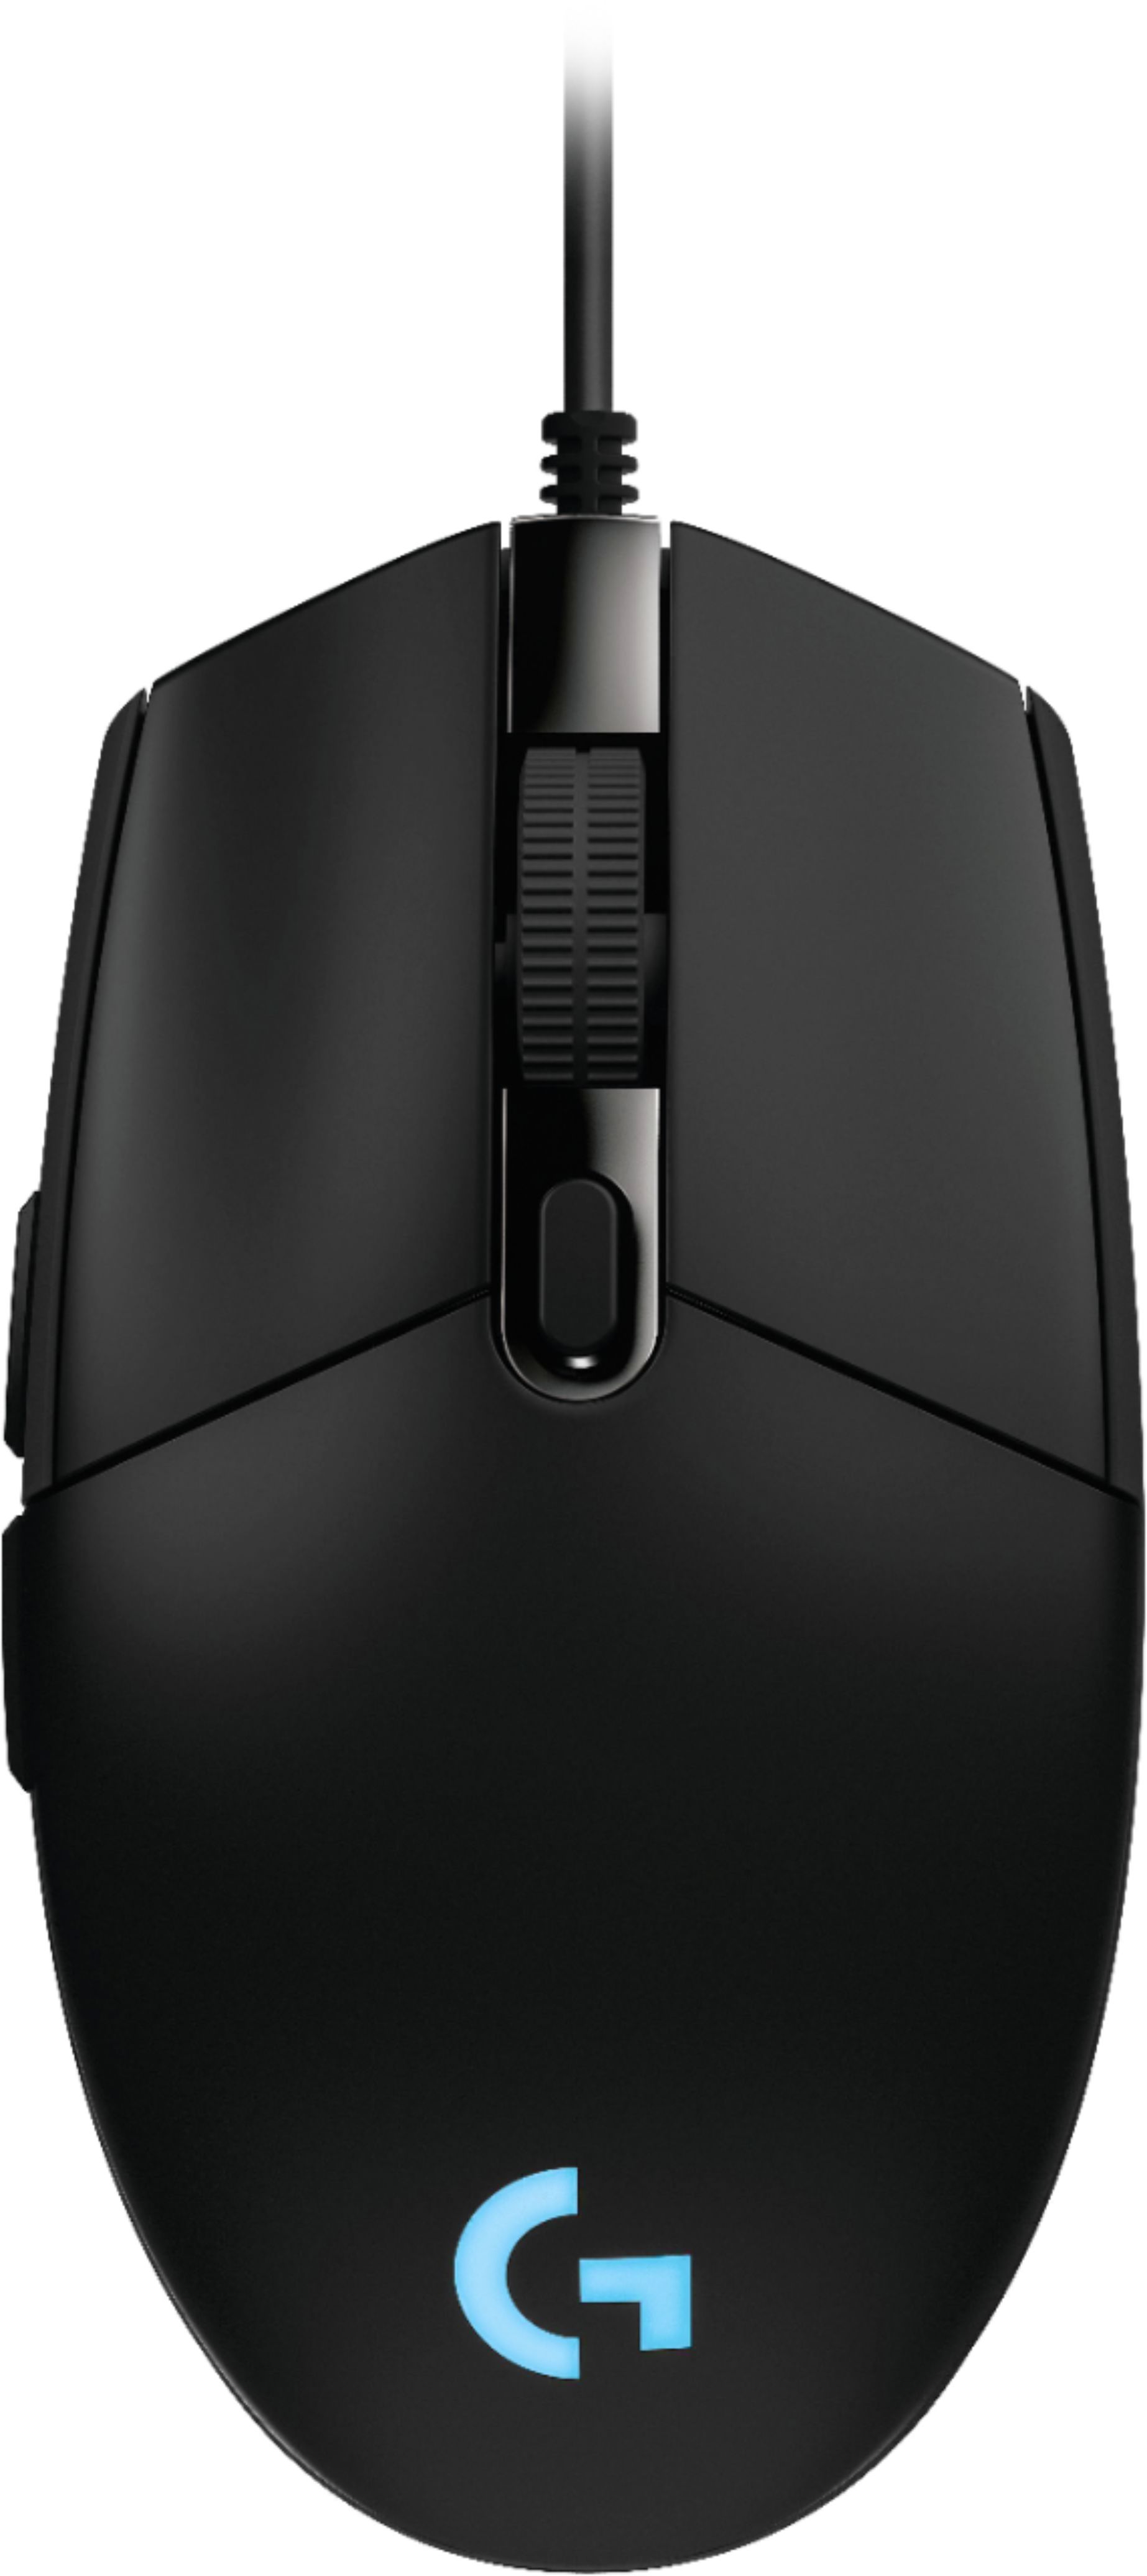 Buy: Logitech G203 Wired Optical Gaming Mouse with RGB Lighting Black 910-004842